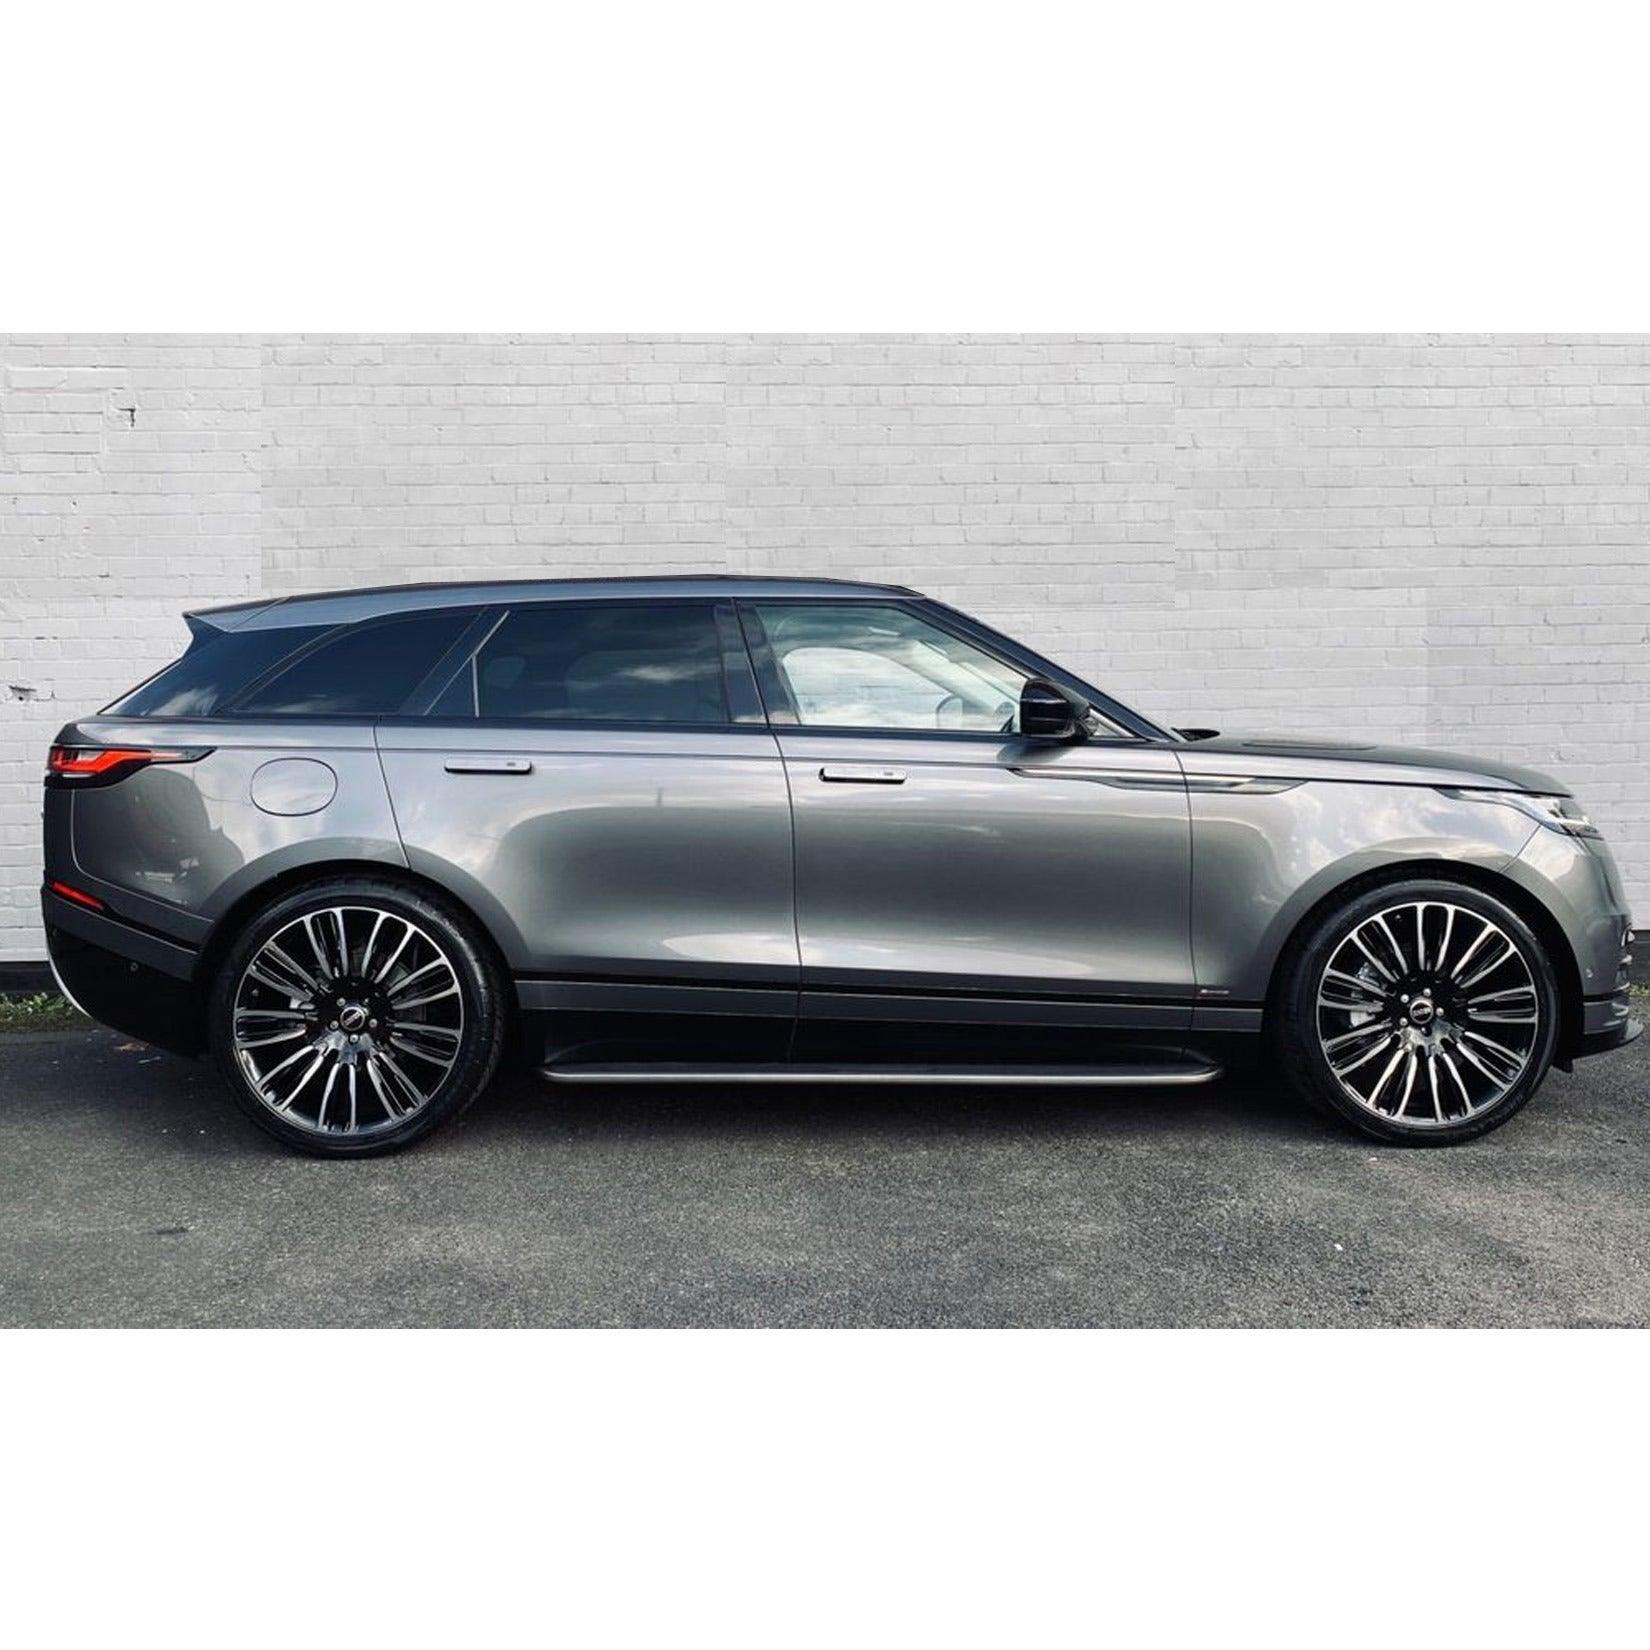 RANGE ROVER VELAR 2017 ON - L560 - OE STYLE RUNNING BOARDS - SIDE STEPS - PAIR - Storm Xccessories2